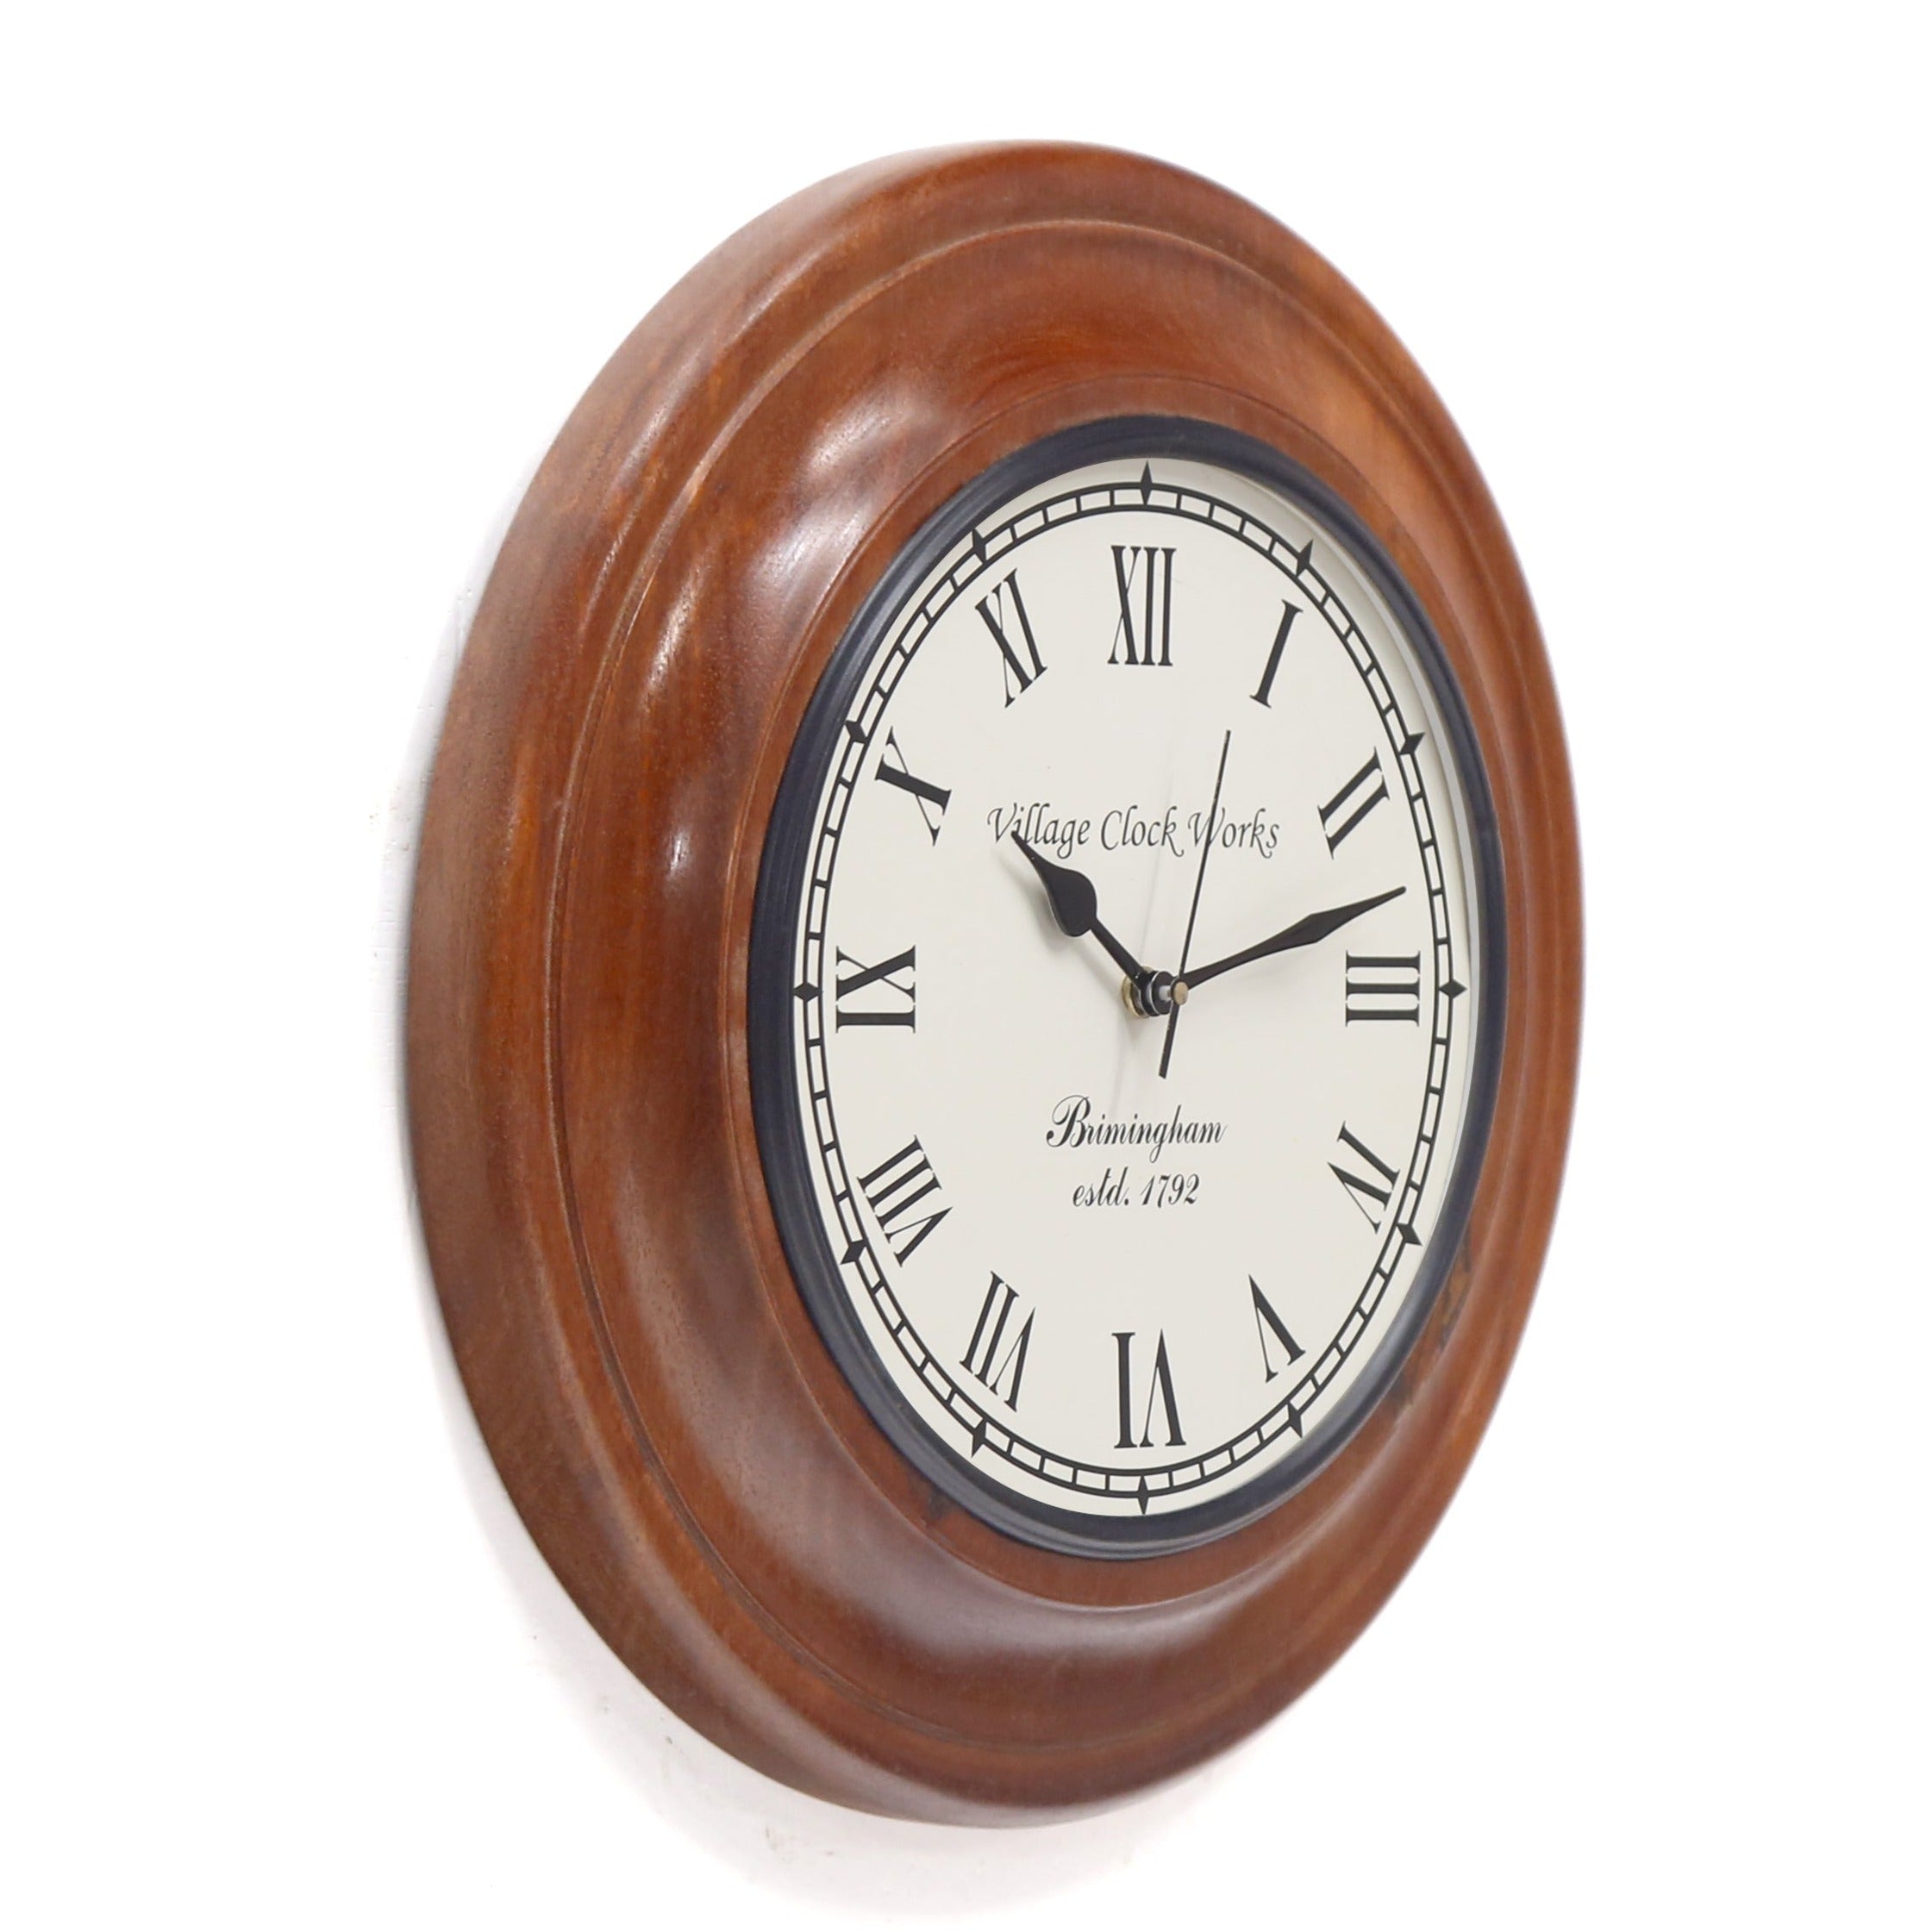 Wooden Colonial Design Clock (18 Inch Round (Dial : 12 Inch)) Clock